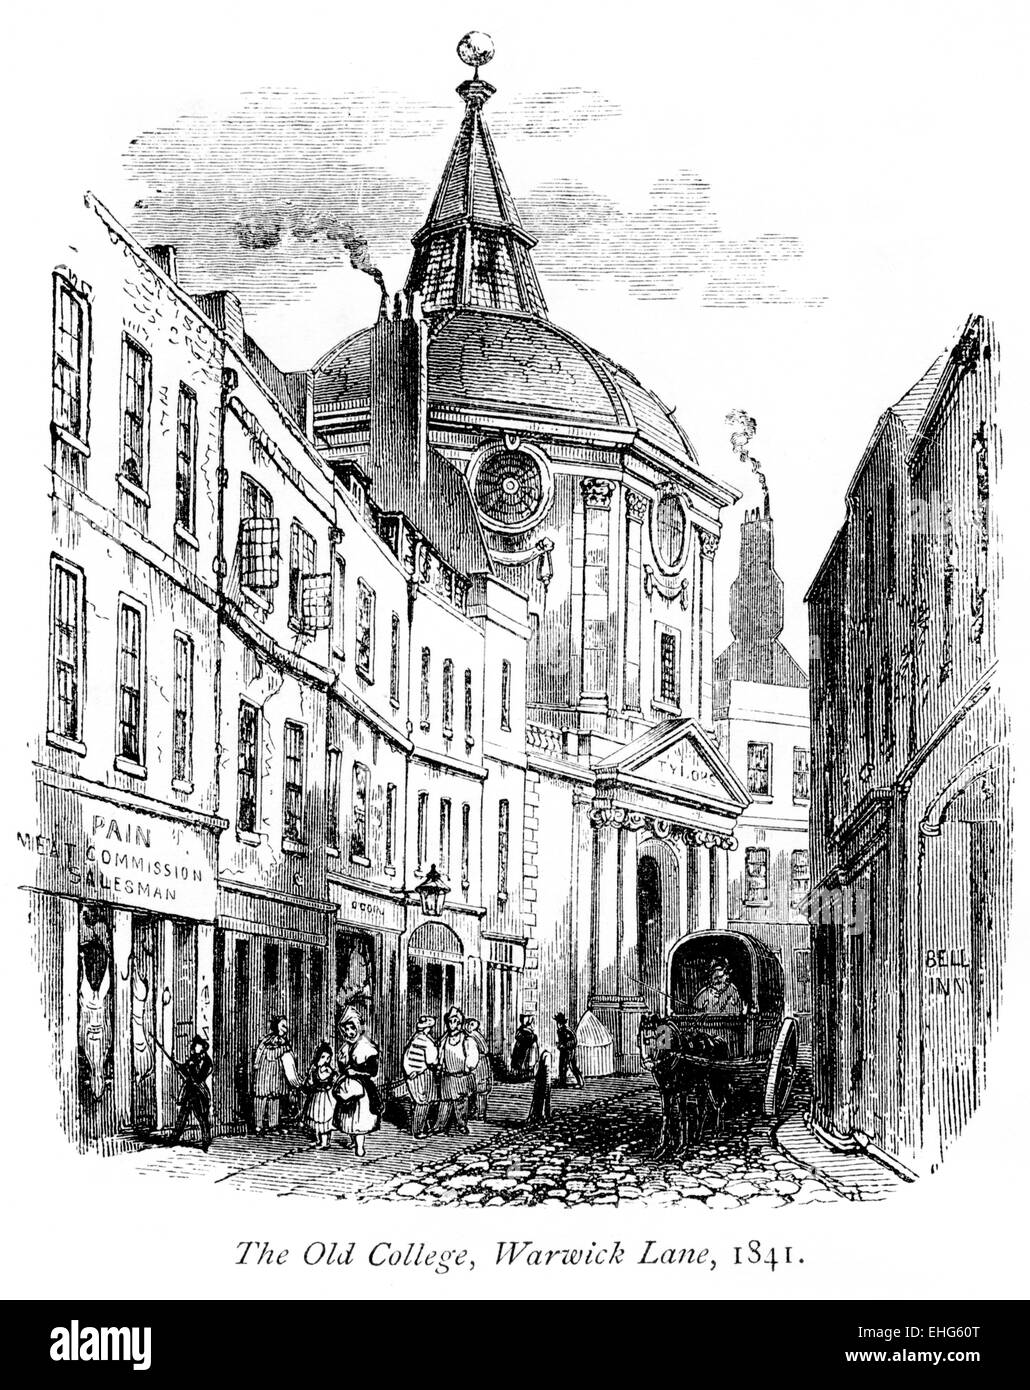 Engraving of The Old College of Physicians, Warwick Lane, London in 1841 scanned at high resolution from a book printed in 1867. Stock Photo